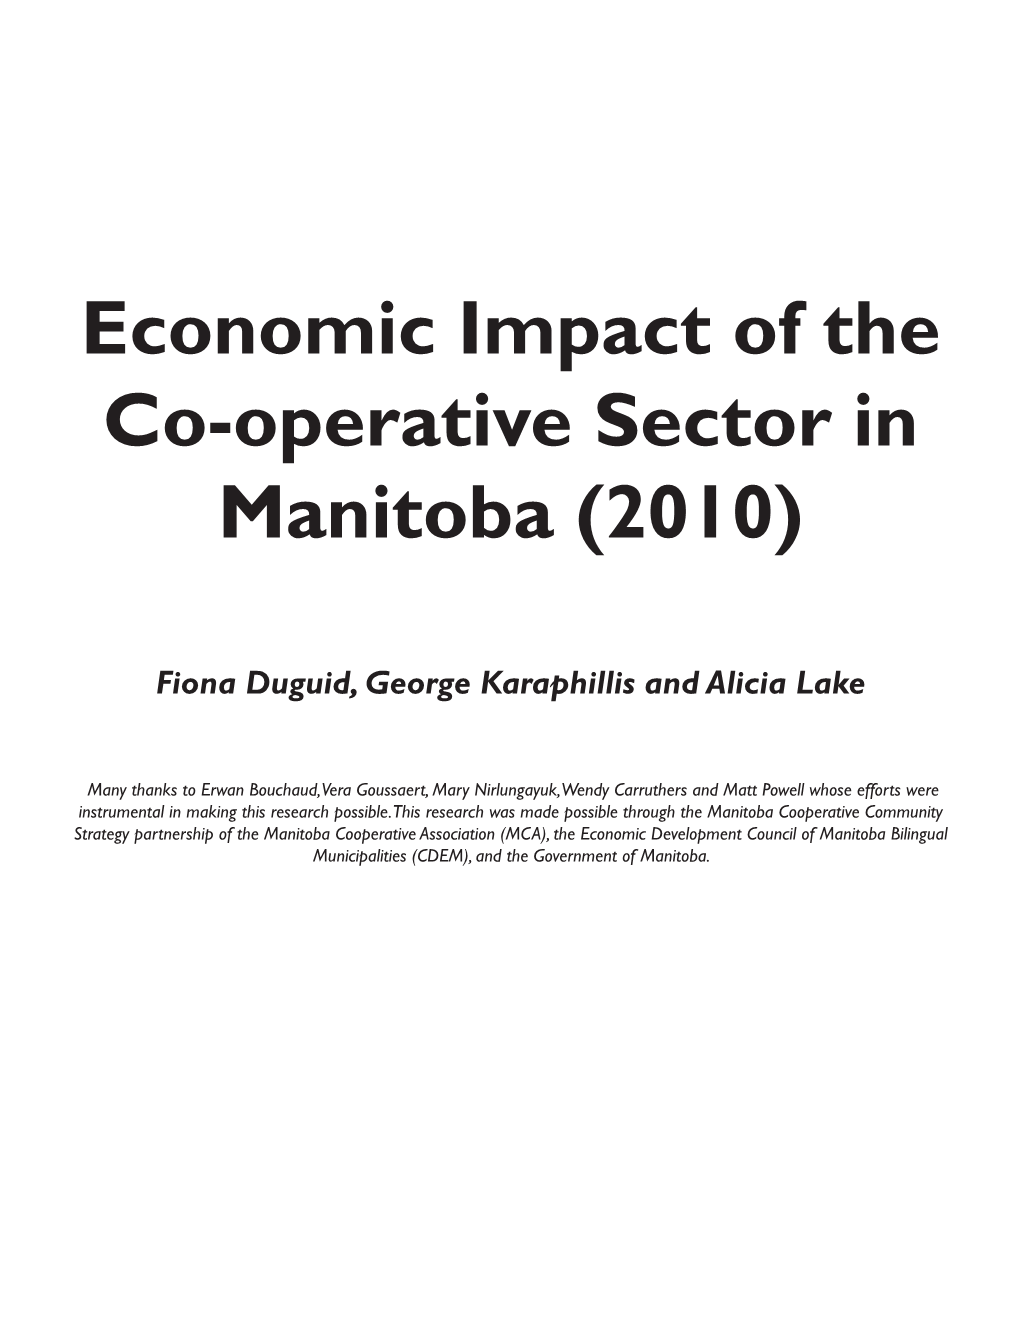 Economic Impact of the Co-Operative Sector in Manitoba (2010)